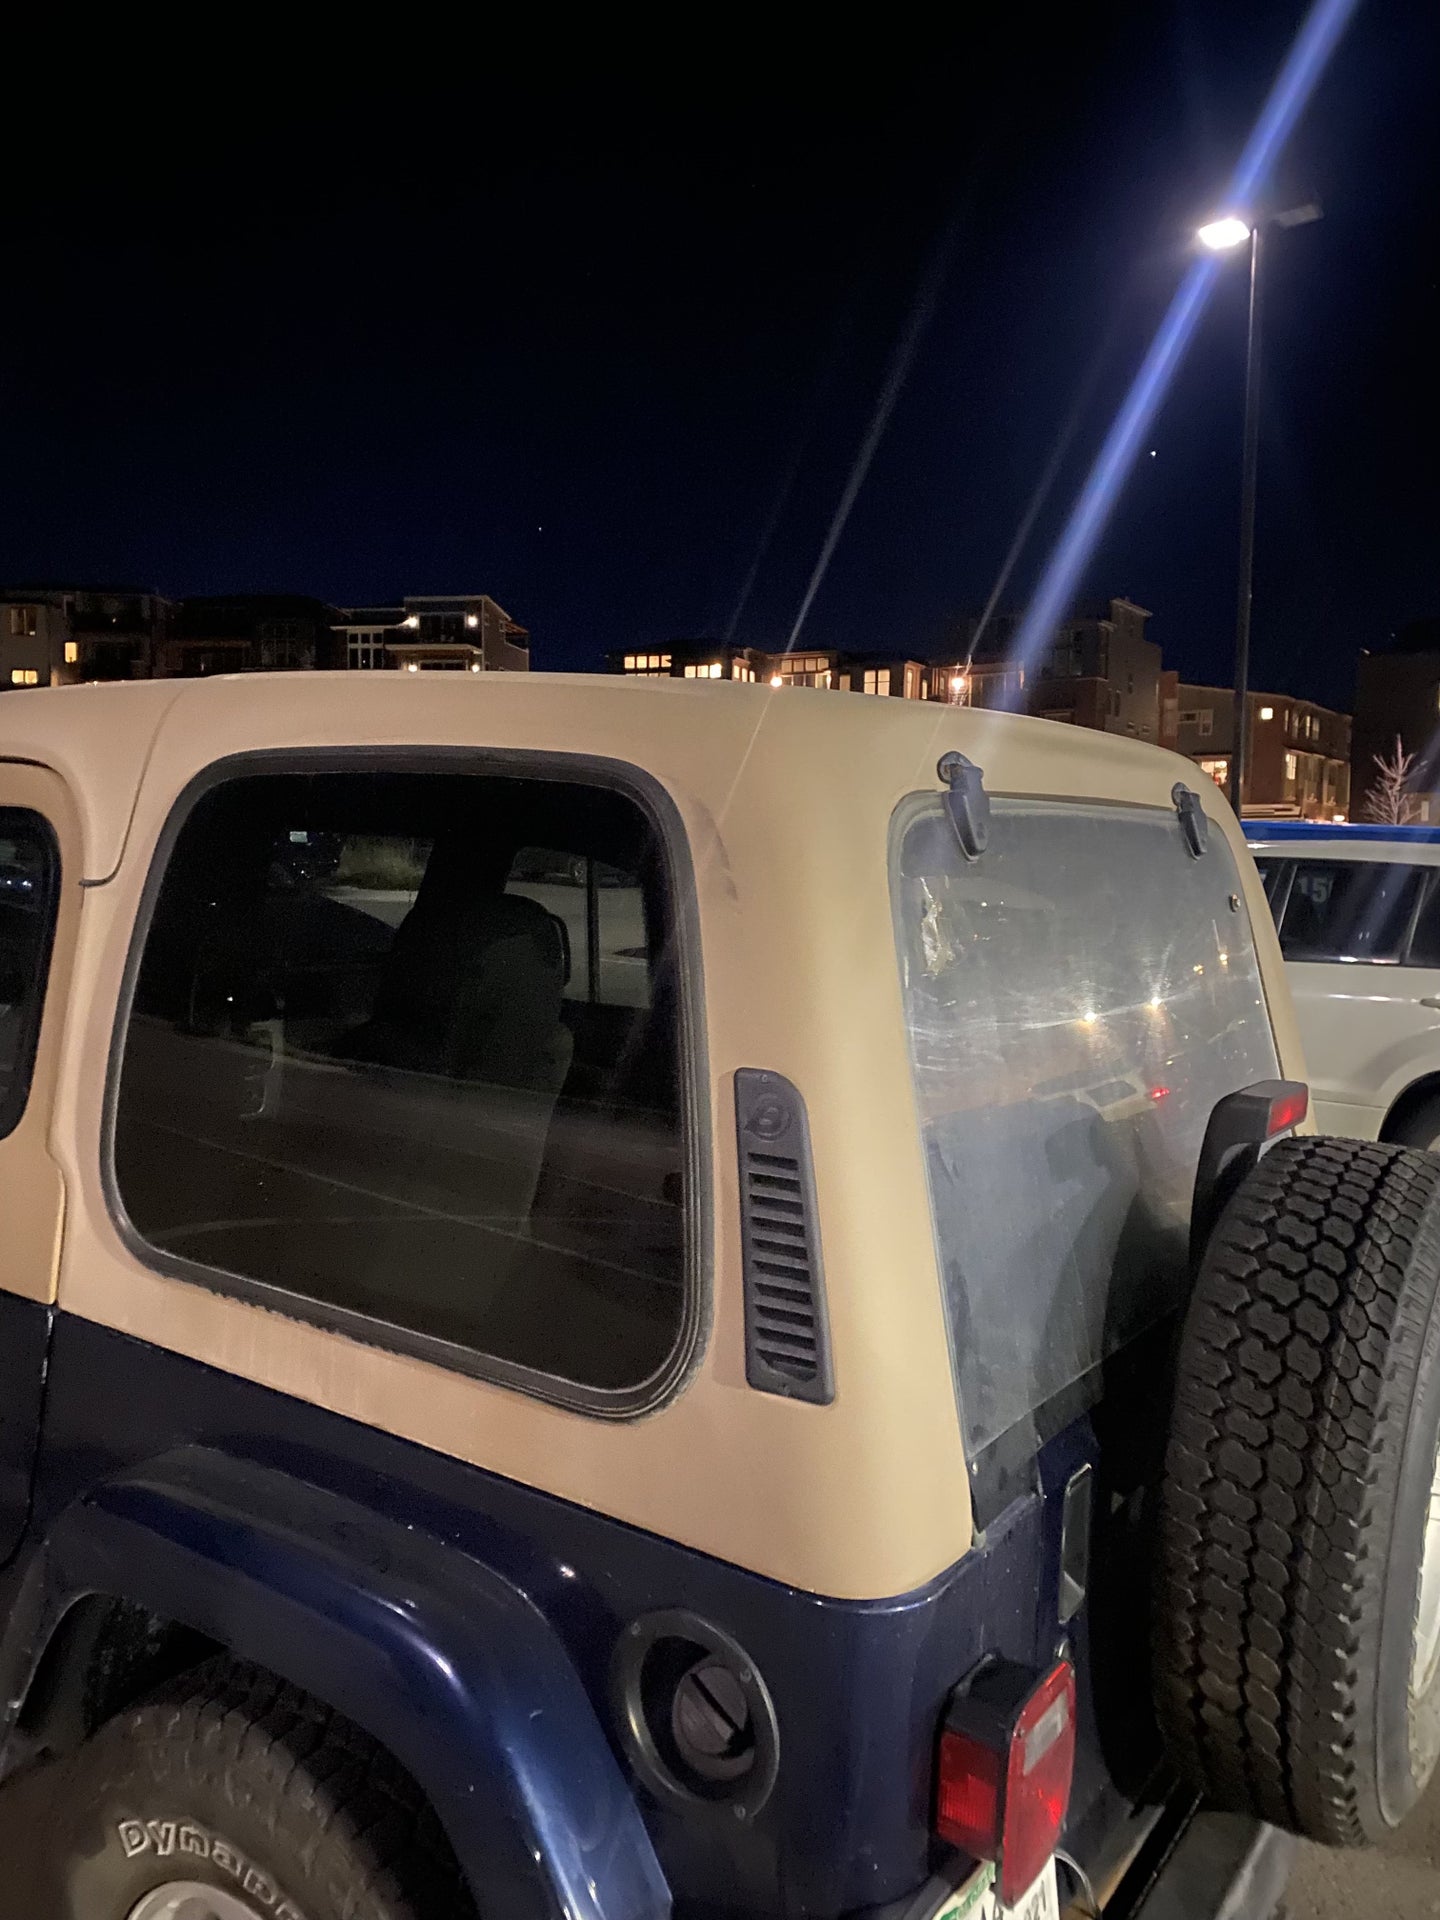 How To Find Rear Glass For Aftermarket Hard Top | Jeep Wrangler Forum